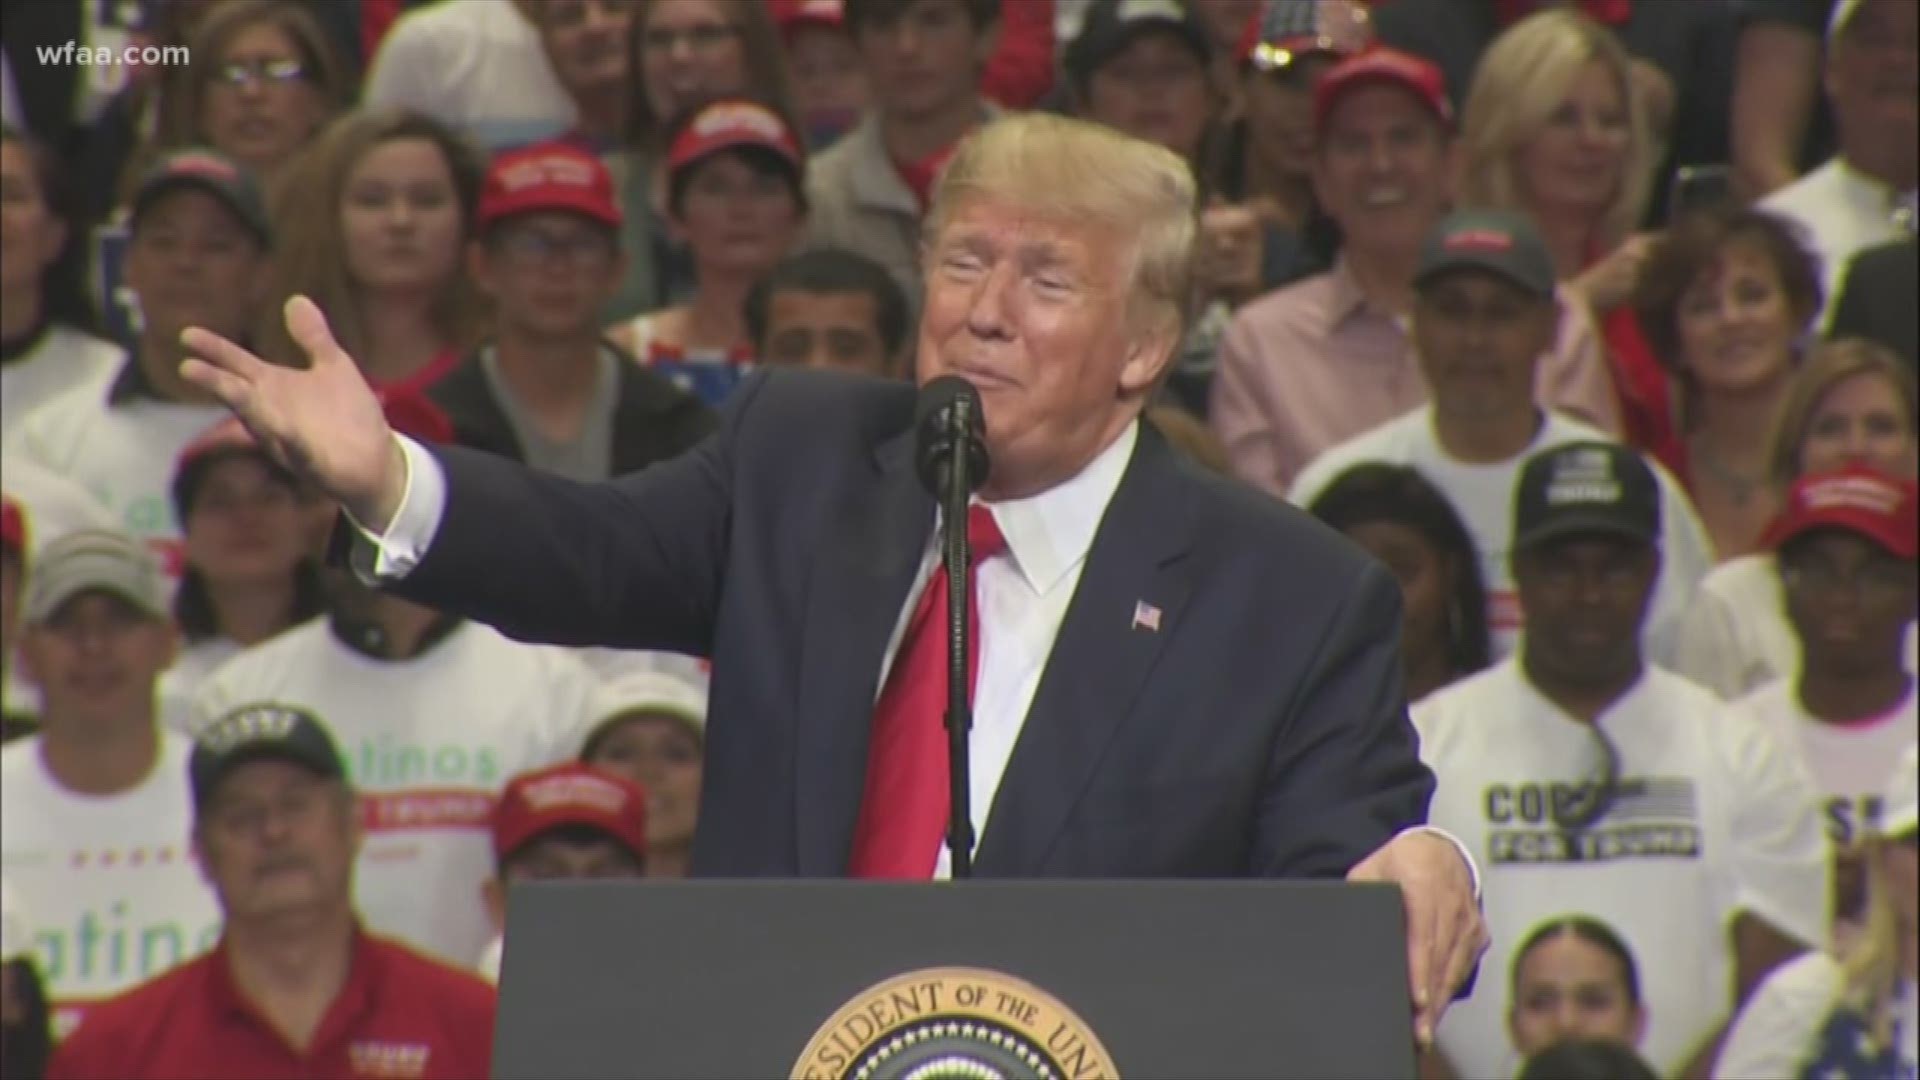 President Trump spoke about Turkey, the economy, Democrats, Beto O'Rourke, Rick Perry and many more topics in his campaign rally at the American Airlines Center.